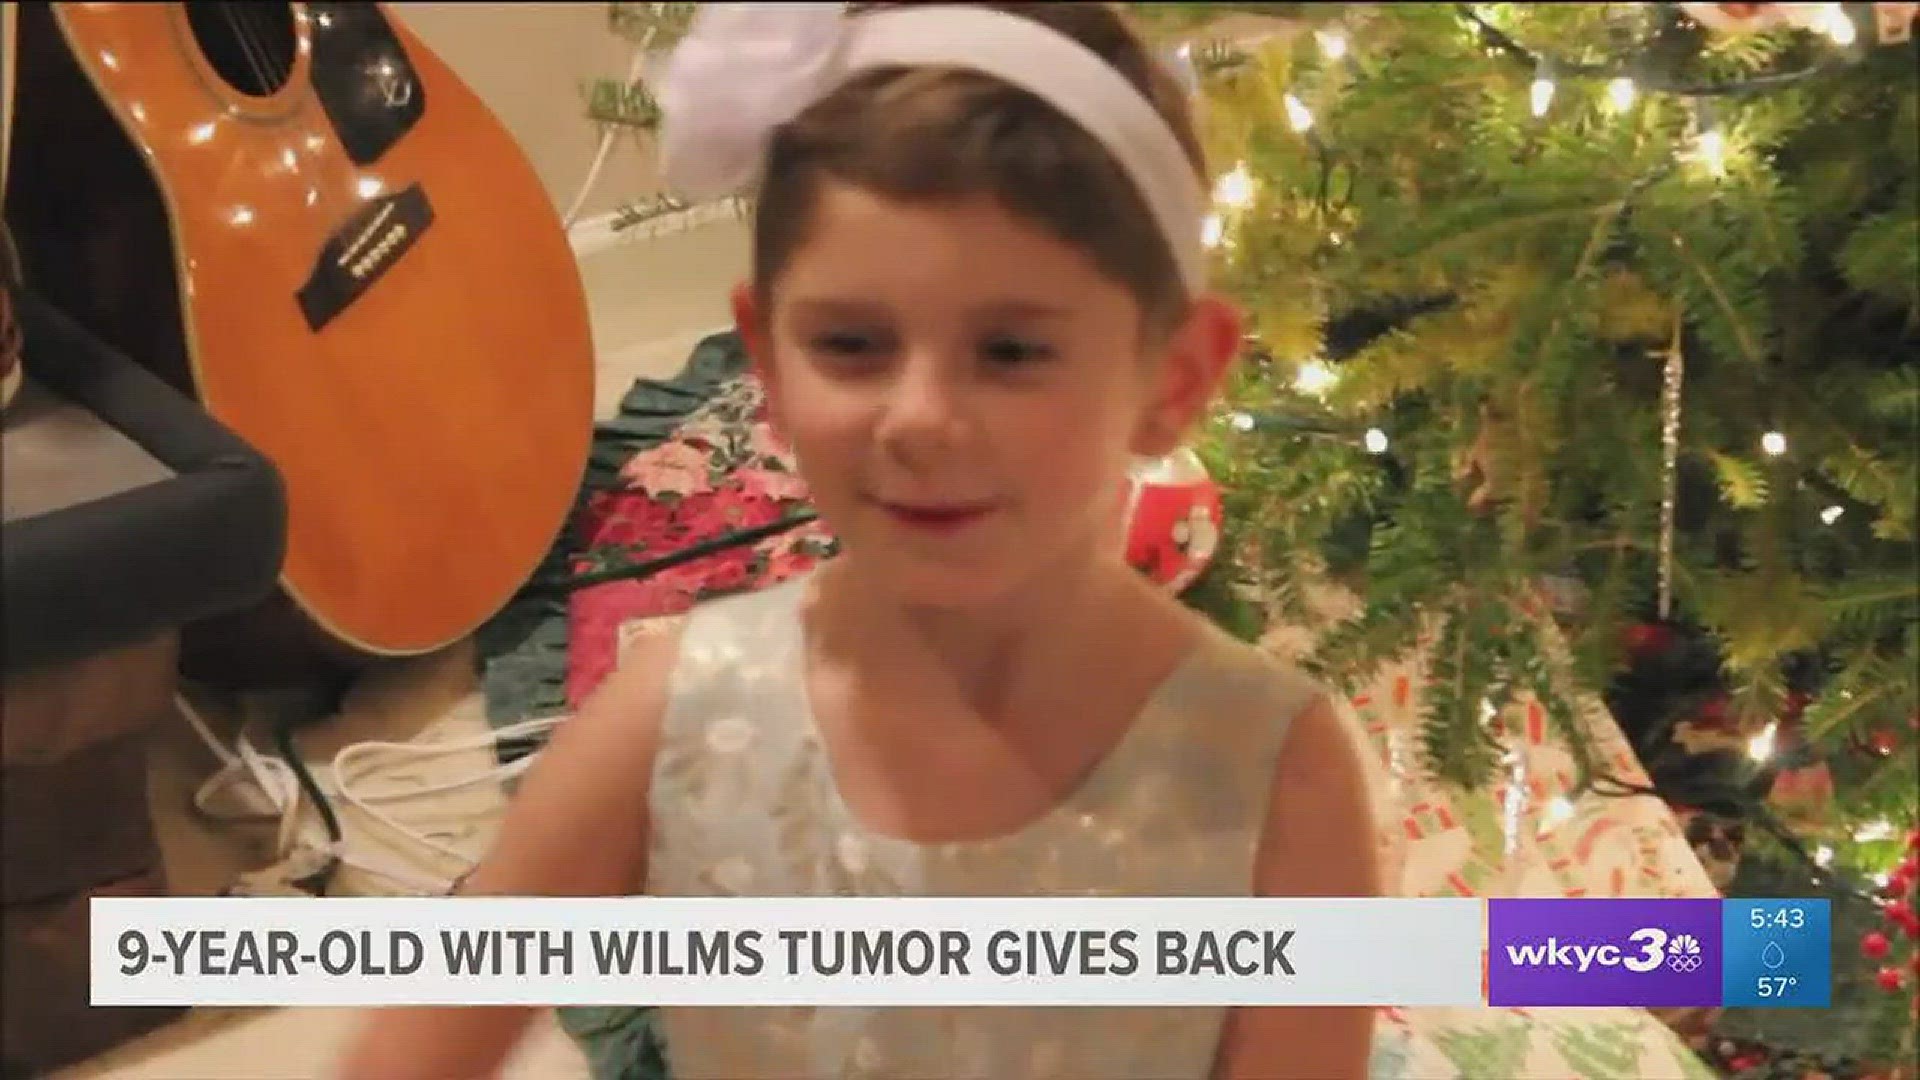 Kylie battles cancer for a third time, more tonight on Channel 3 News at 11